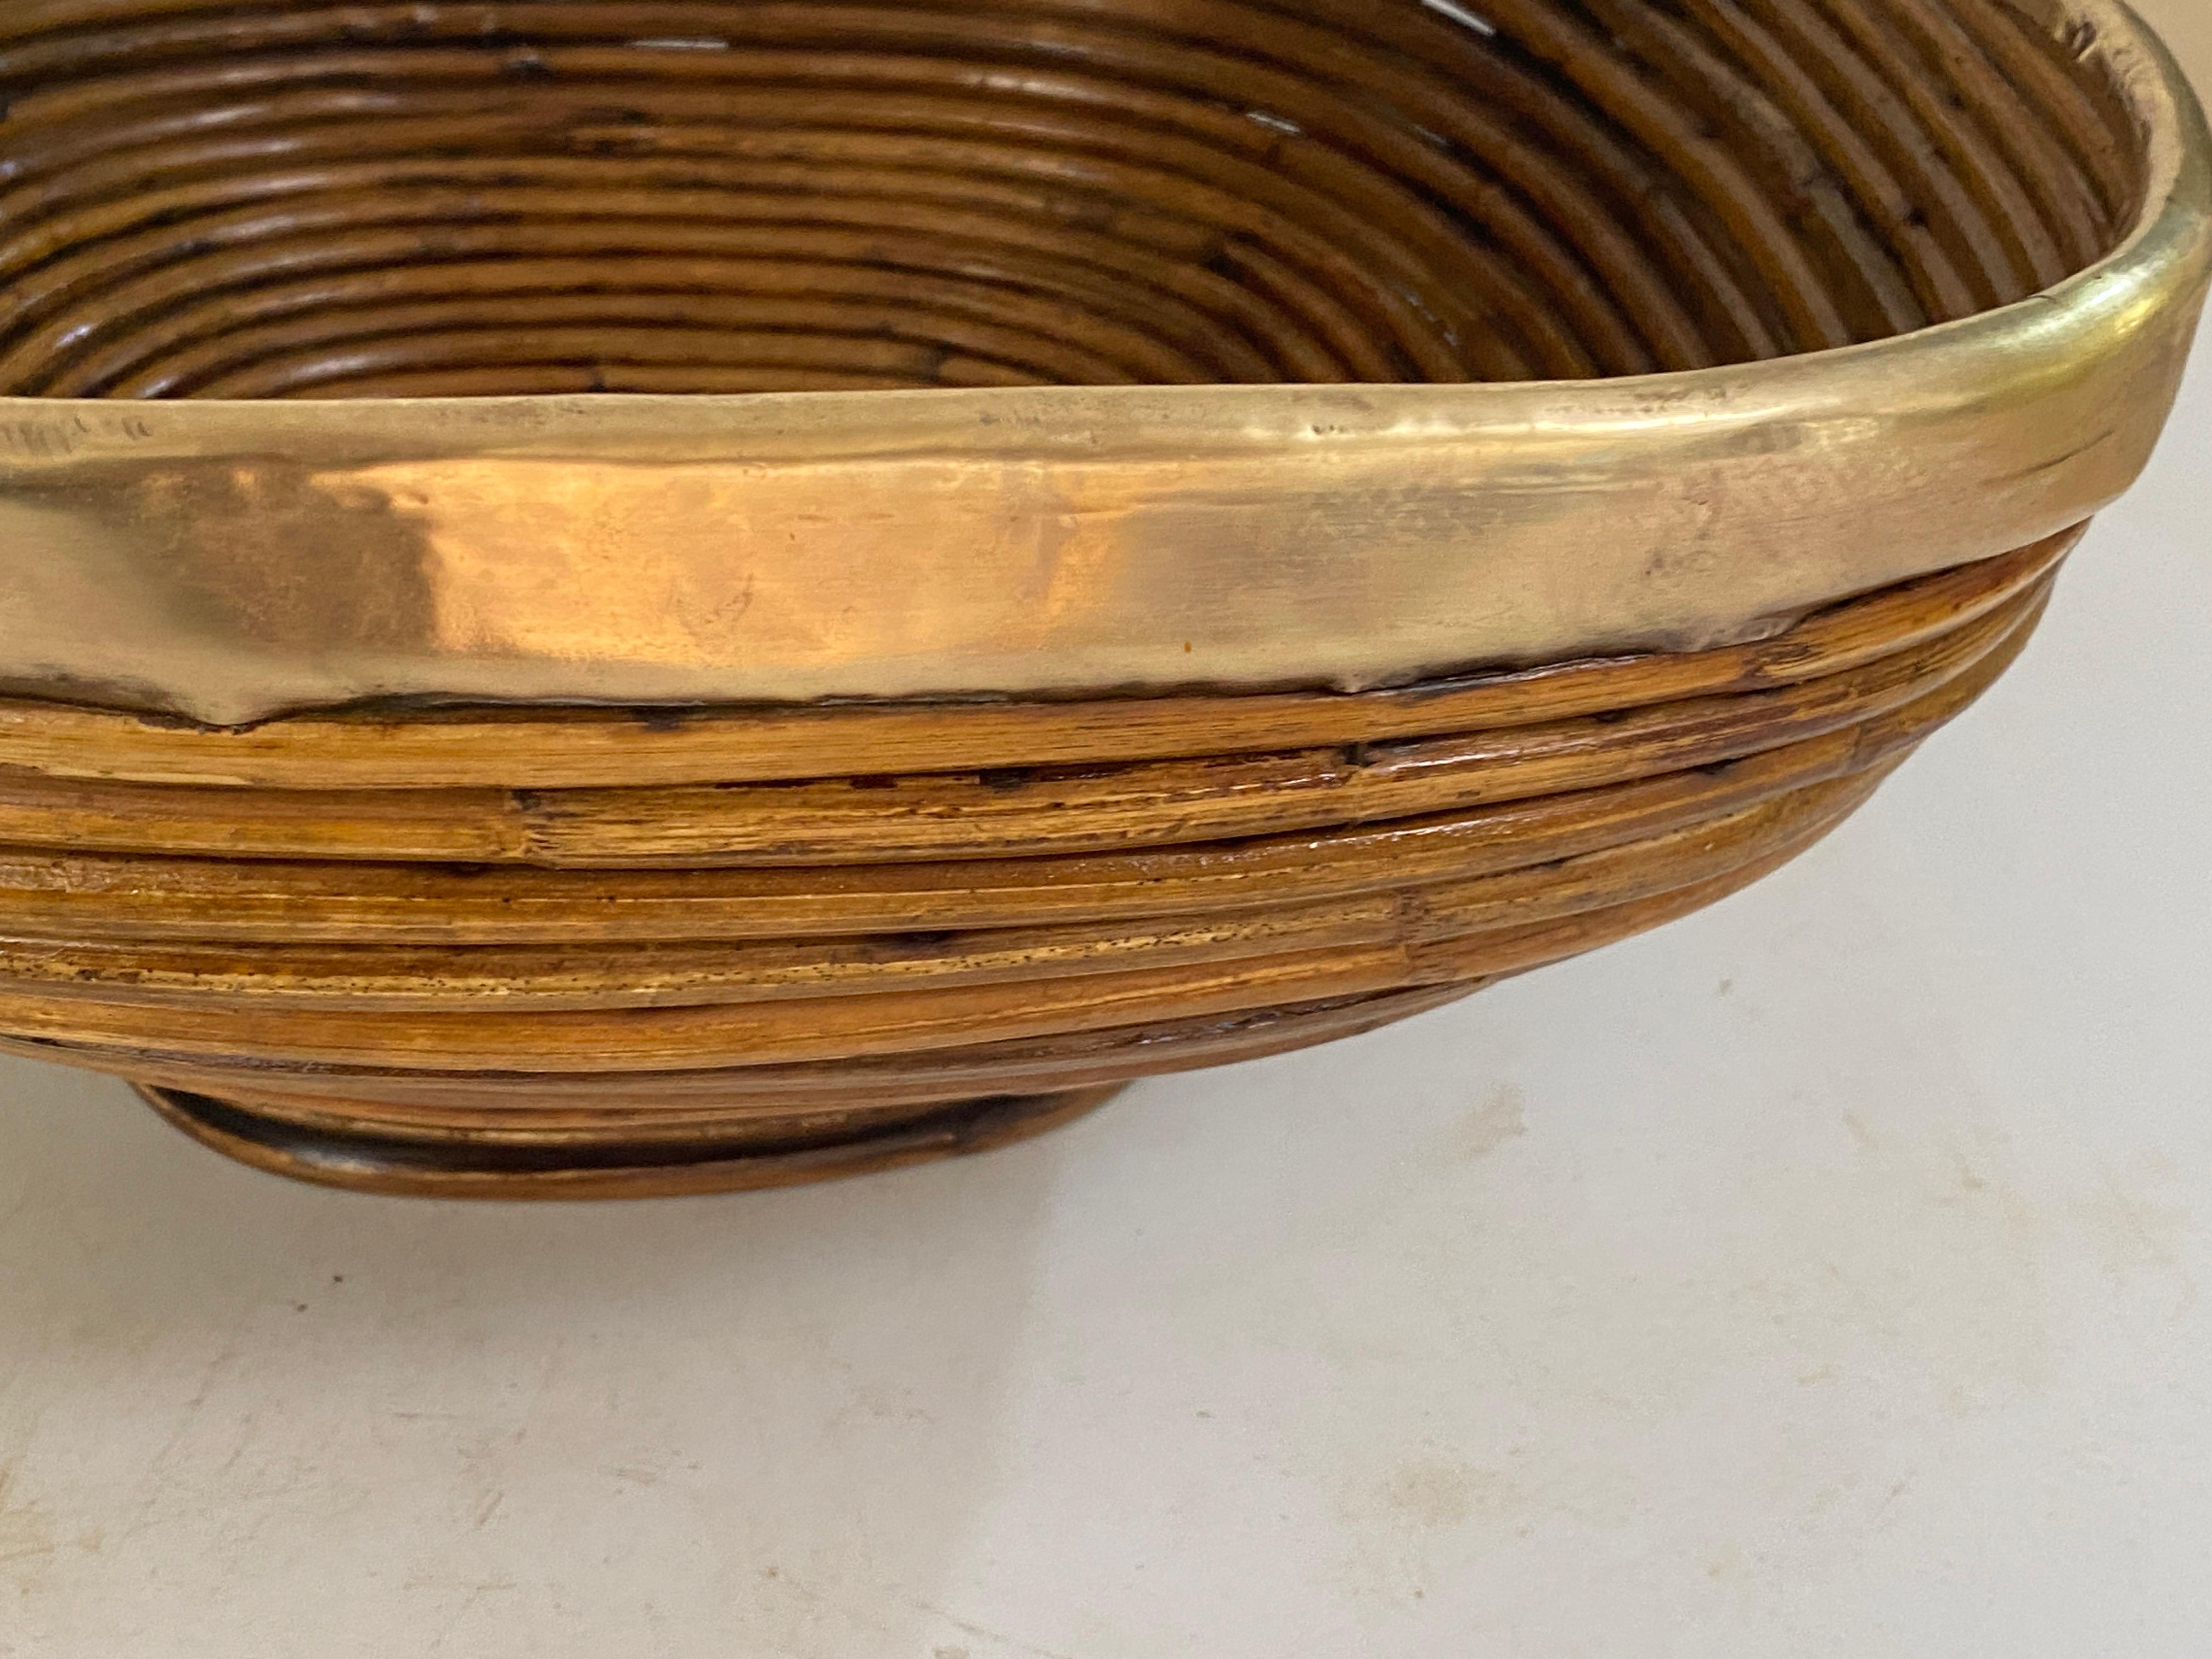 Rattan and Brass Italian Large Basket Bowl Centerpiece, 1970s Crespi Style For Sale 7